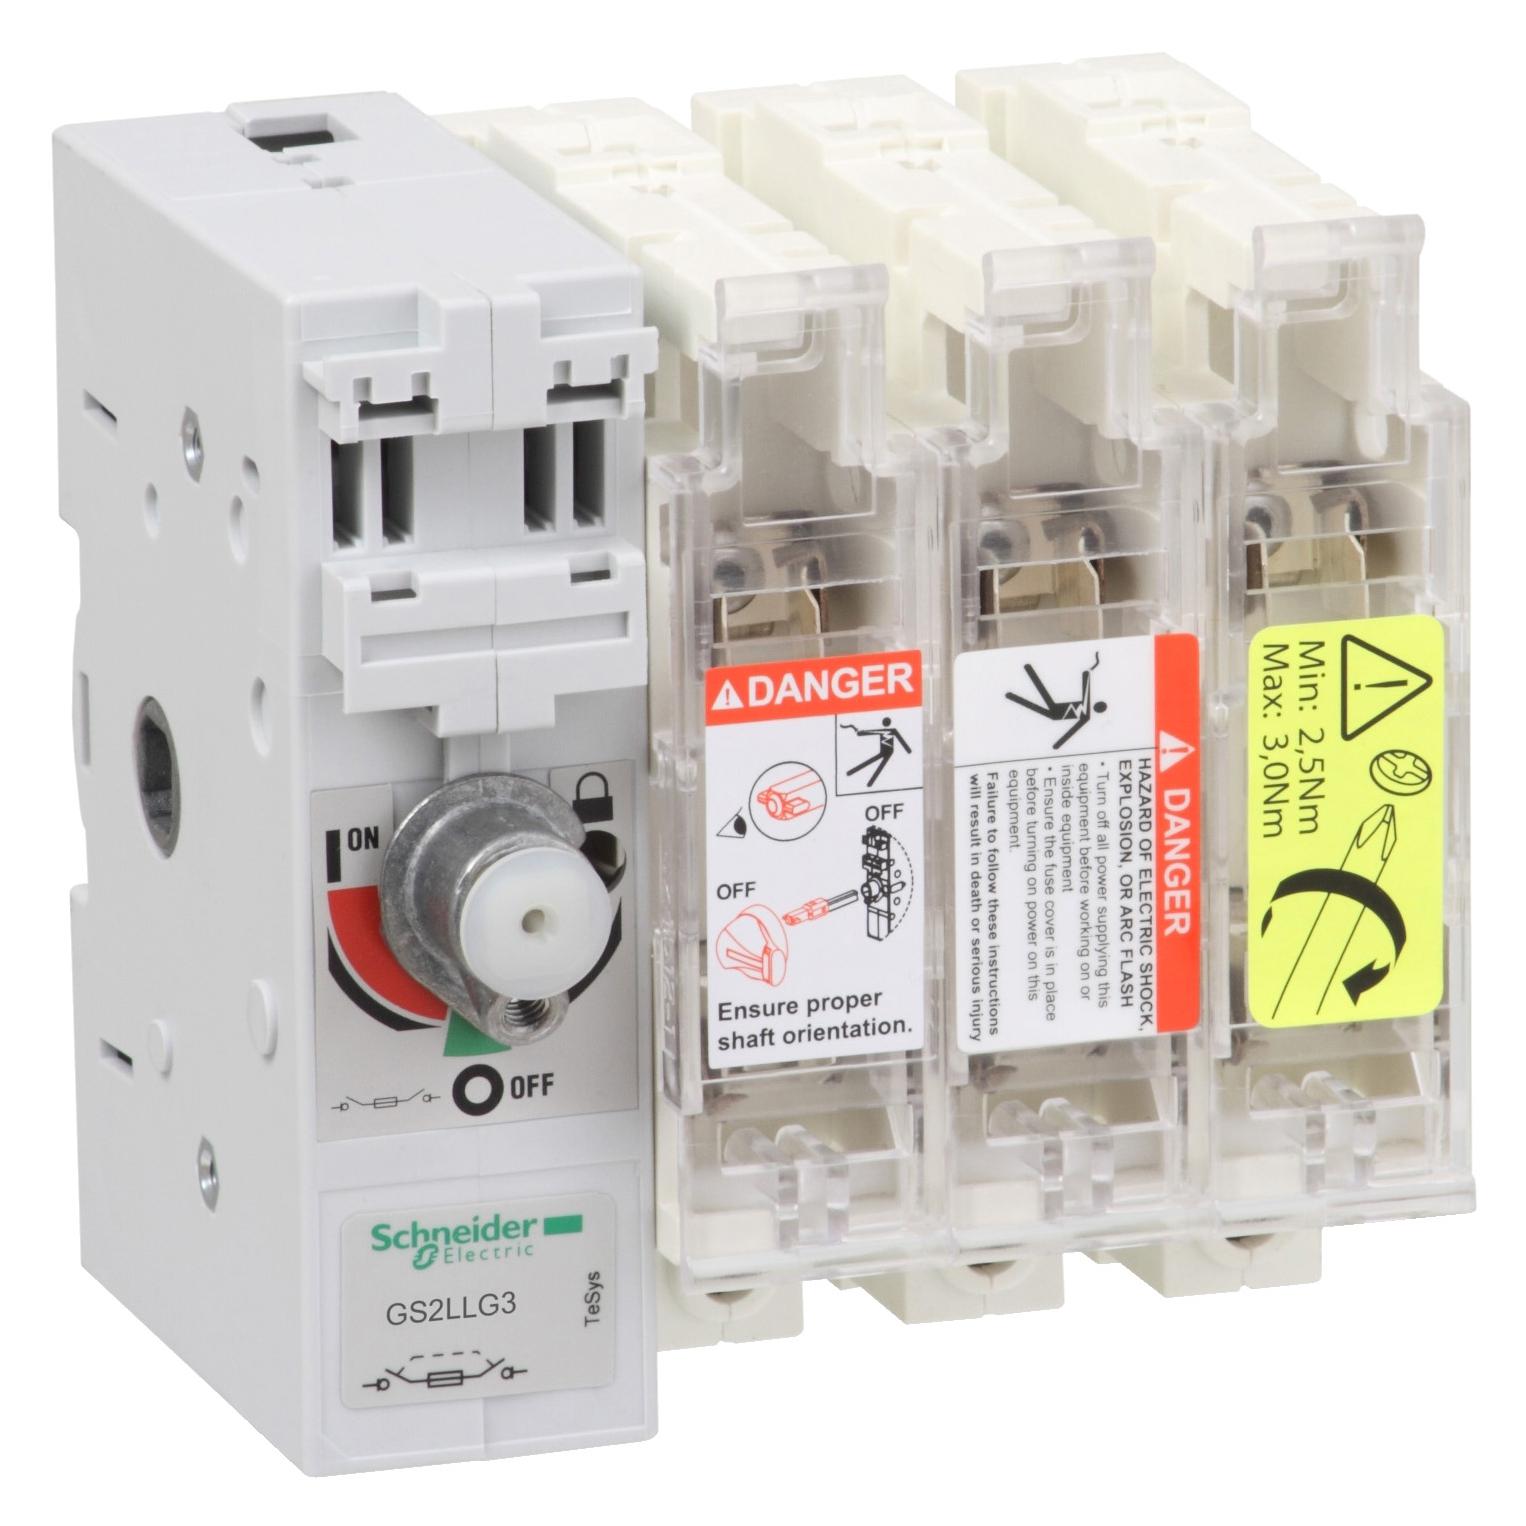 GS2LG3 FUSE DISCONNECT SW. 3X 160A 0 SCHNEIDER ELECTRIC